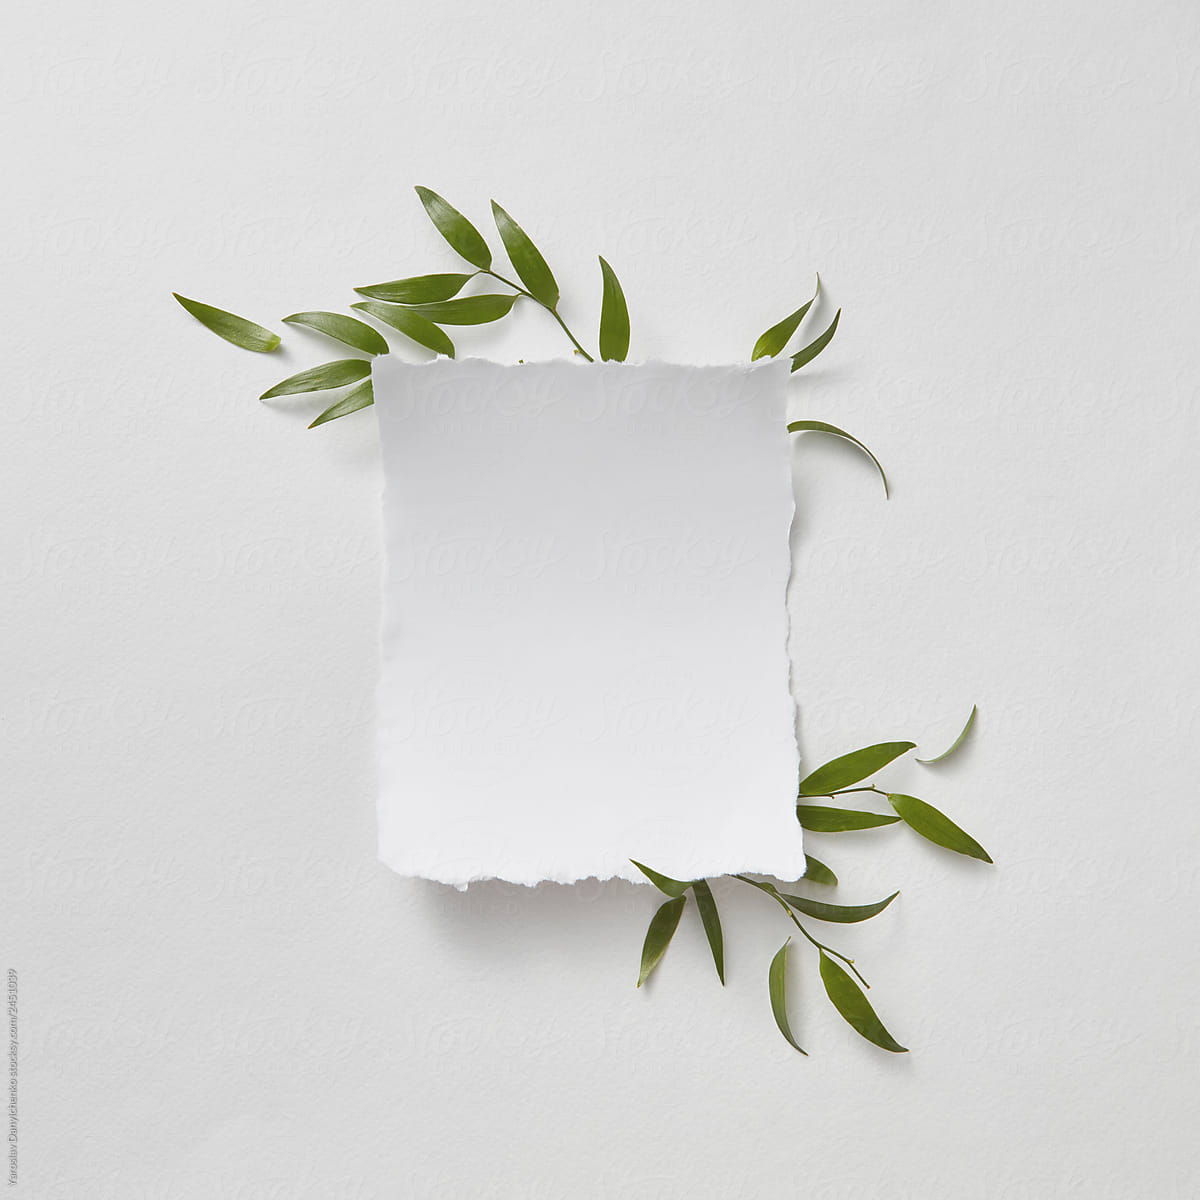 Natural composition of green branches and blank paper on gray paper background with copy space. Flat lay